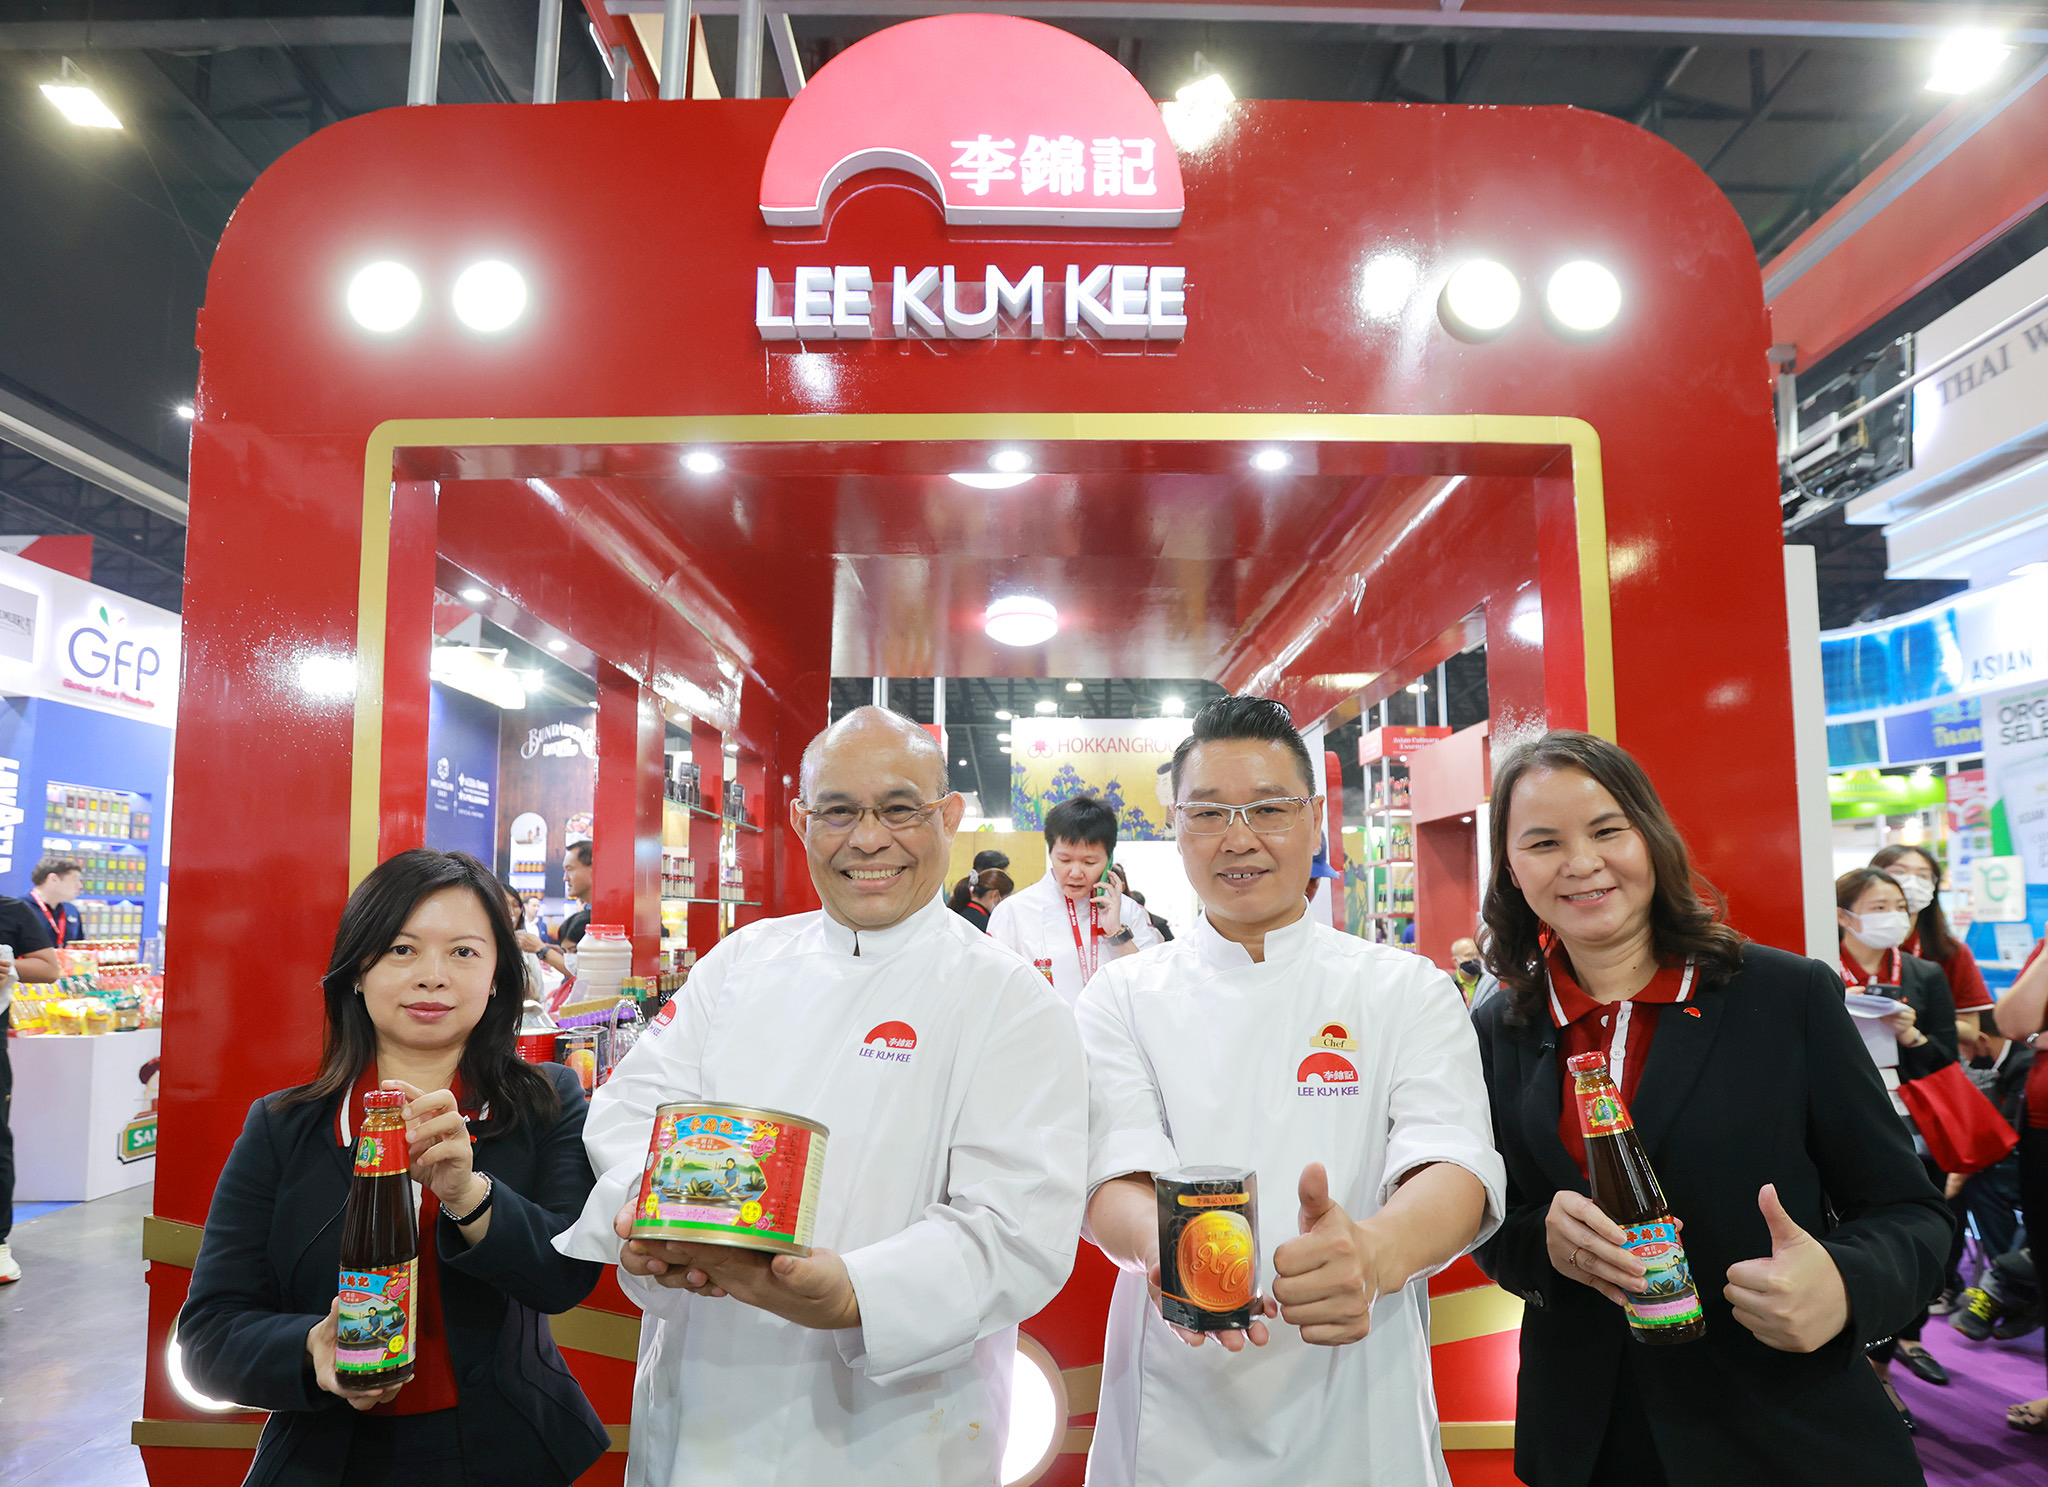 Ms. Cheryl Chan, Regional Marketing Director of Lee Kum Kee; Chef Thanarak Chuto (Chef Pom); Master Chef Kwok-keung Chan; and Ms. Pramata Chantakool, Senior Business Manager, Thailand of Lee Kum Kee pictured at THAIFEX (from left to right)